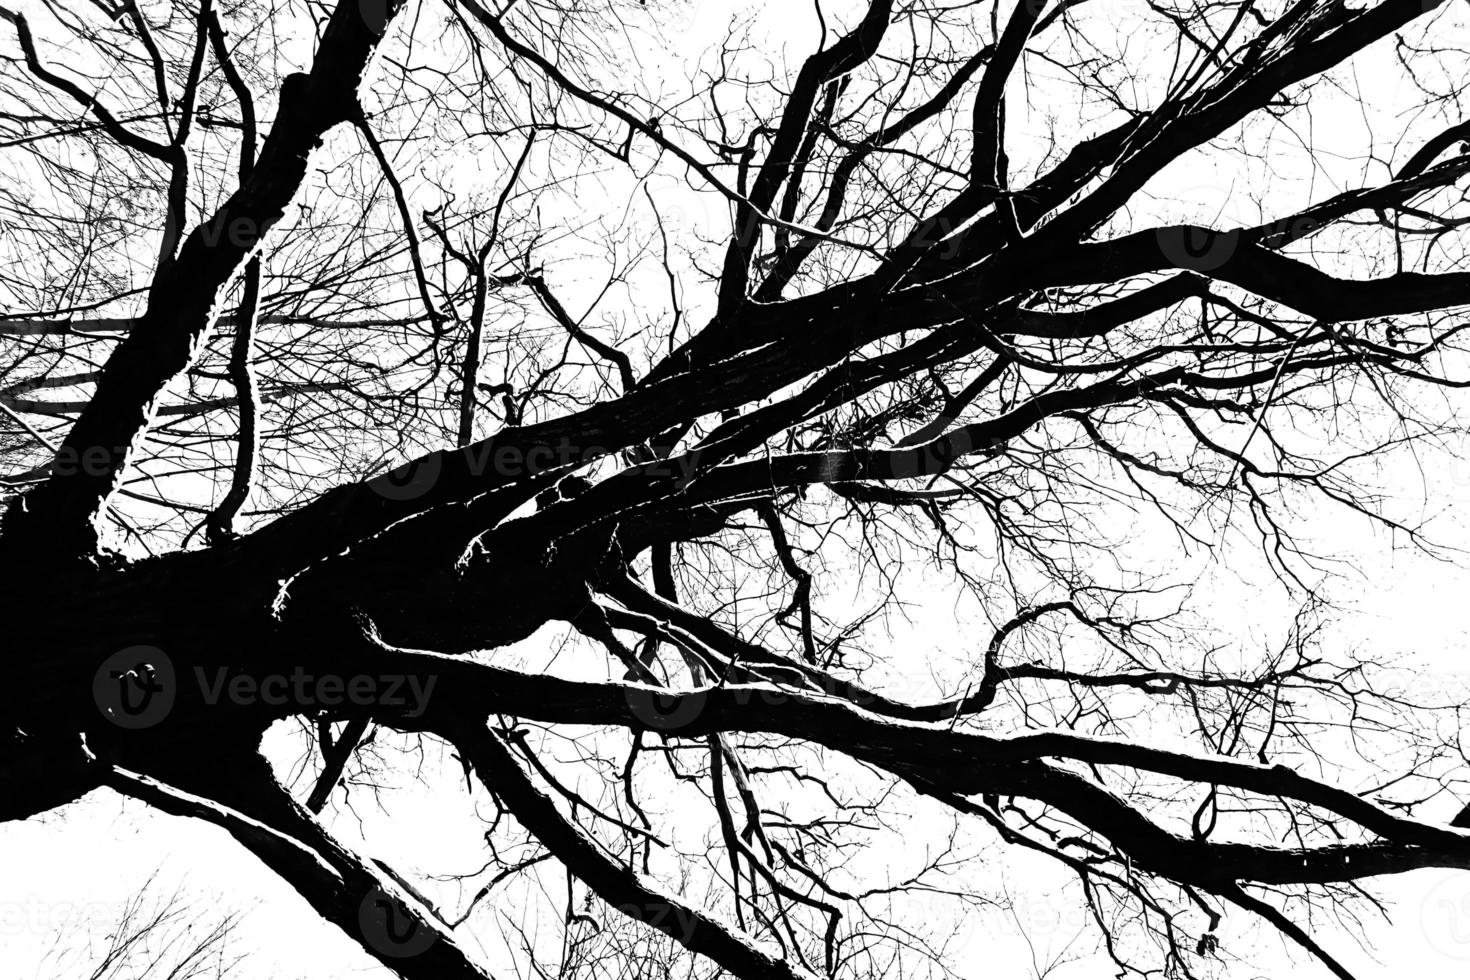 Black and White Trees Branches Covered in Snow photo